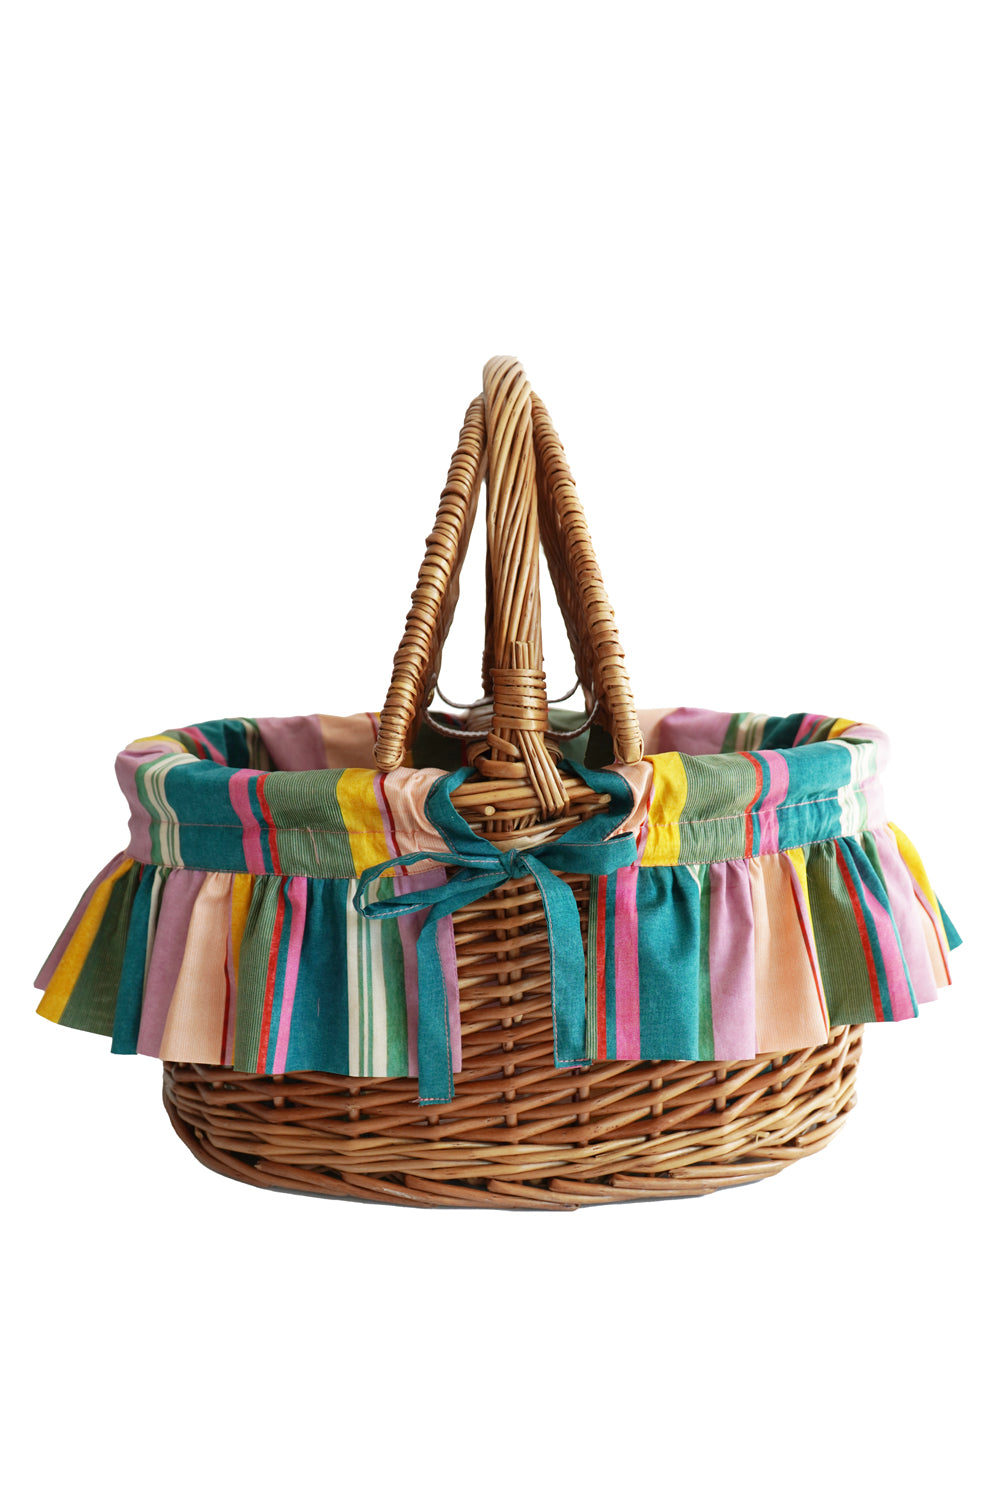 Oval Picnic Basket made with Liberty Fabric ARCHIVE SWATCH